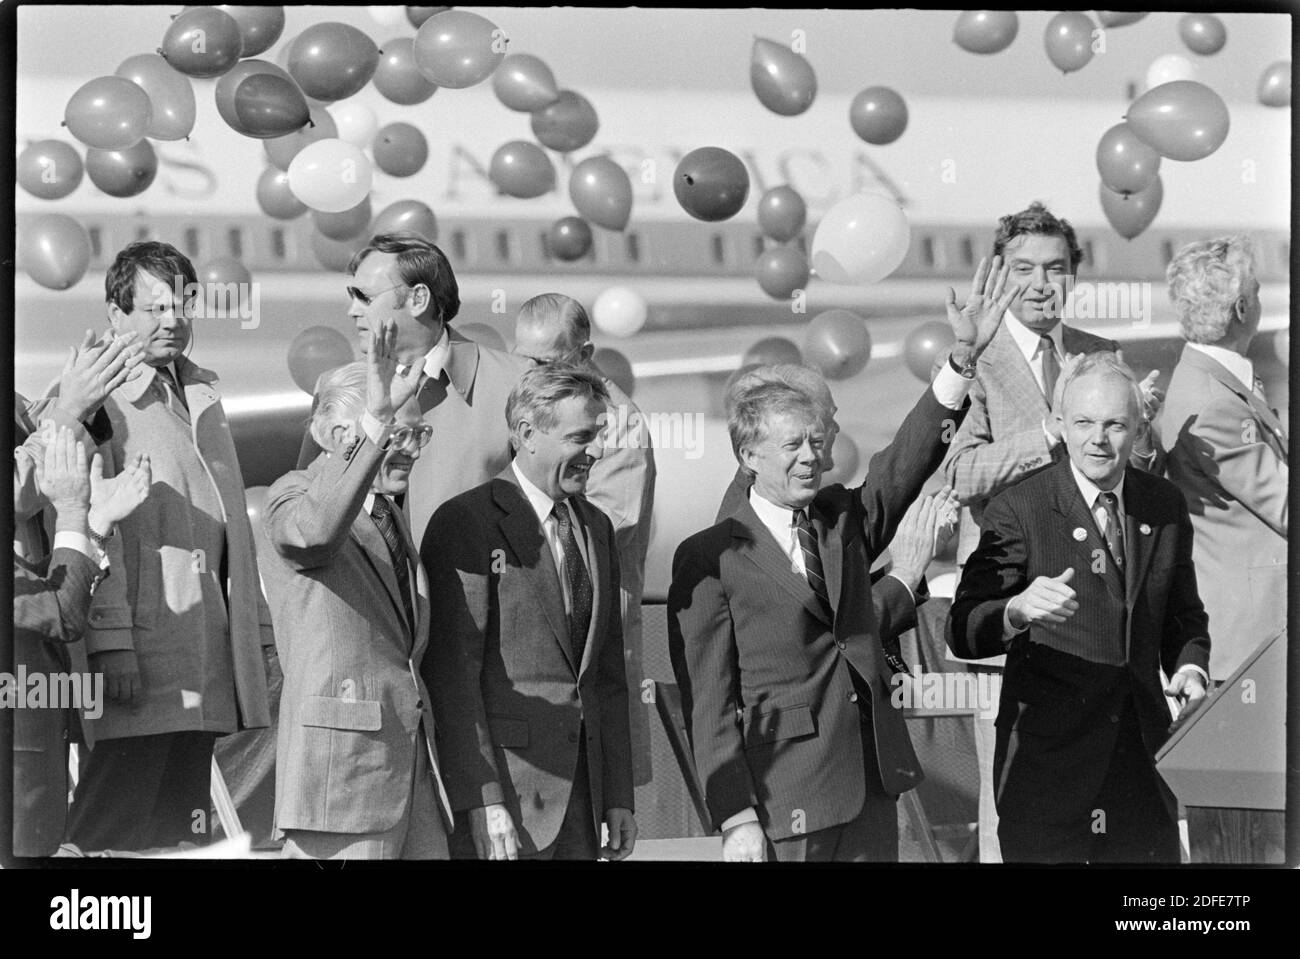 President Jimmy Carter and vice-president Walter Mondale make a campaign stop in Cleveland Ohio in 1980. At left is US Senator Howard Metzenbaum. At right is US Rep. John Seiberling. Ernie Mastroianni photo Stock Photo